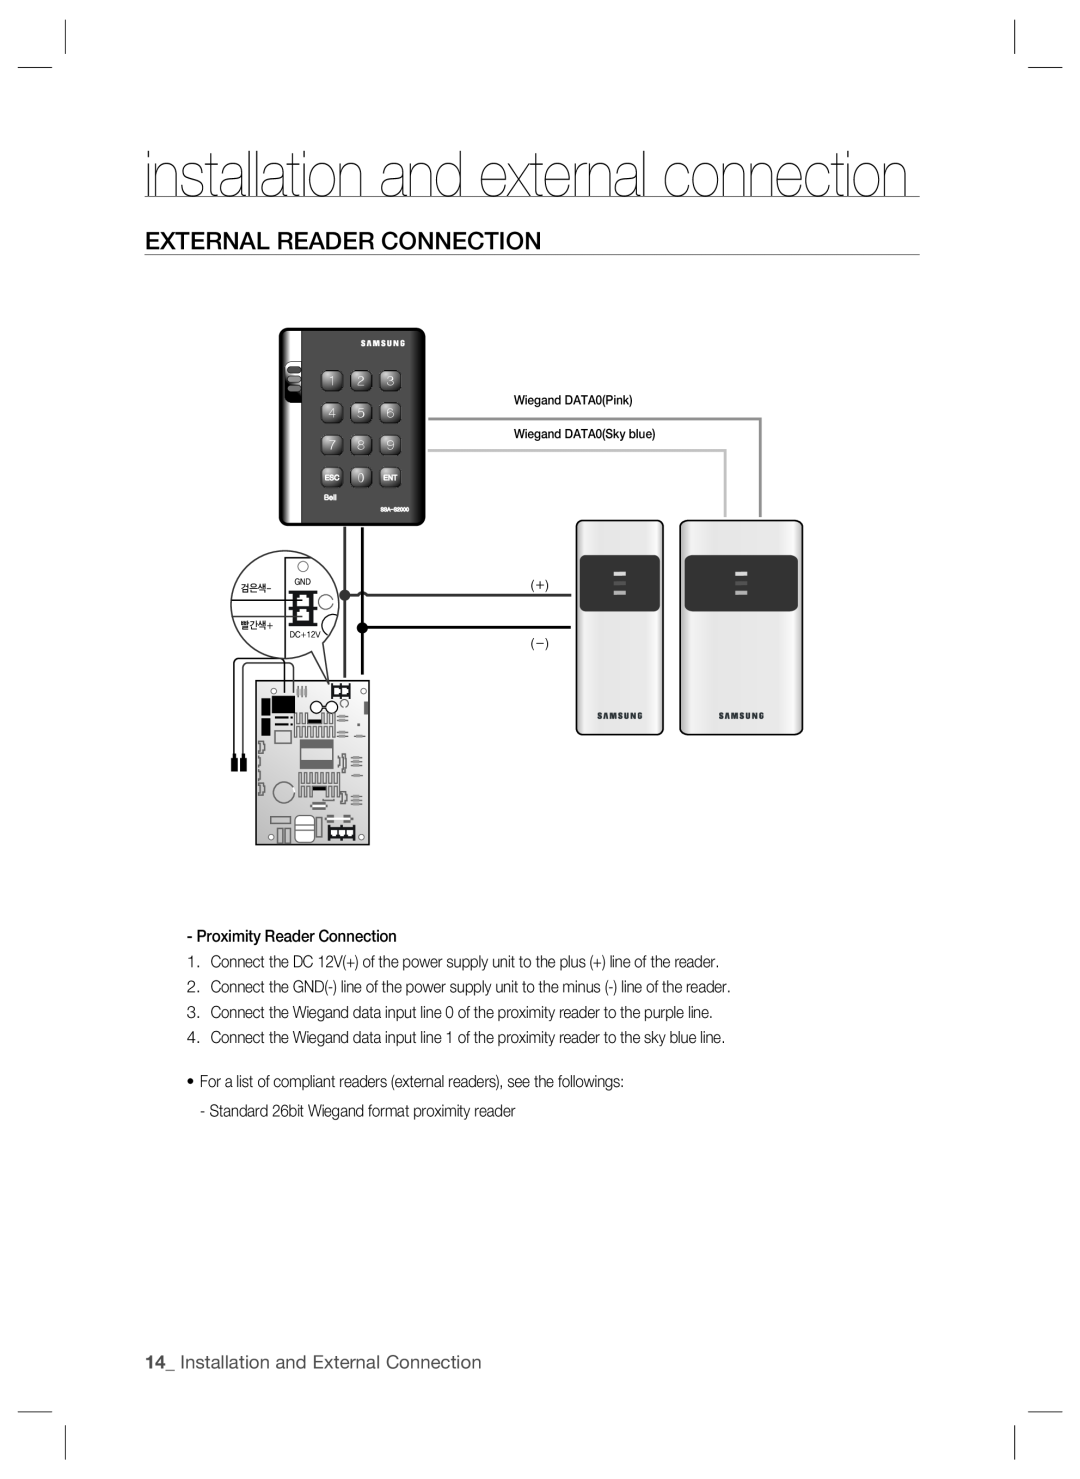 Samsung SSA-S2000W user manual External Reader Connection, 14_ Installation and External Connection 